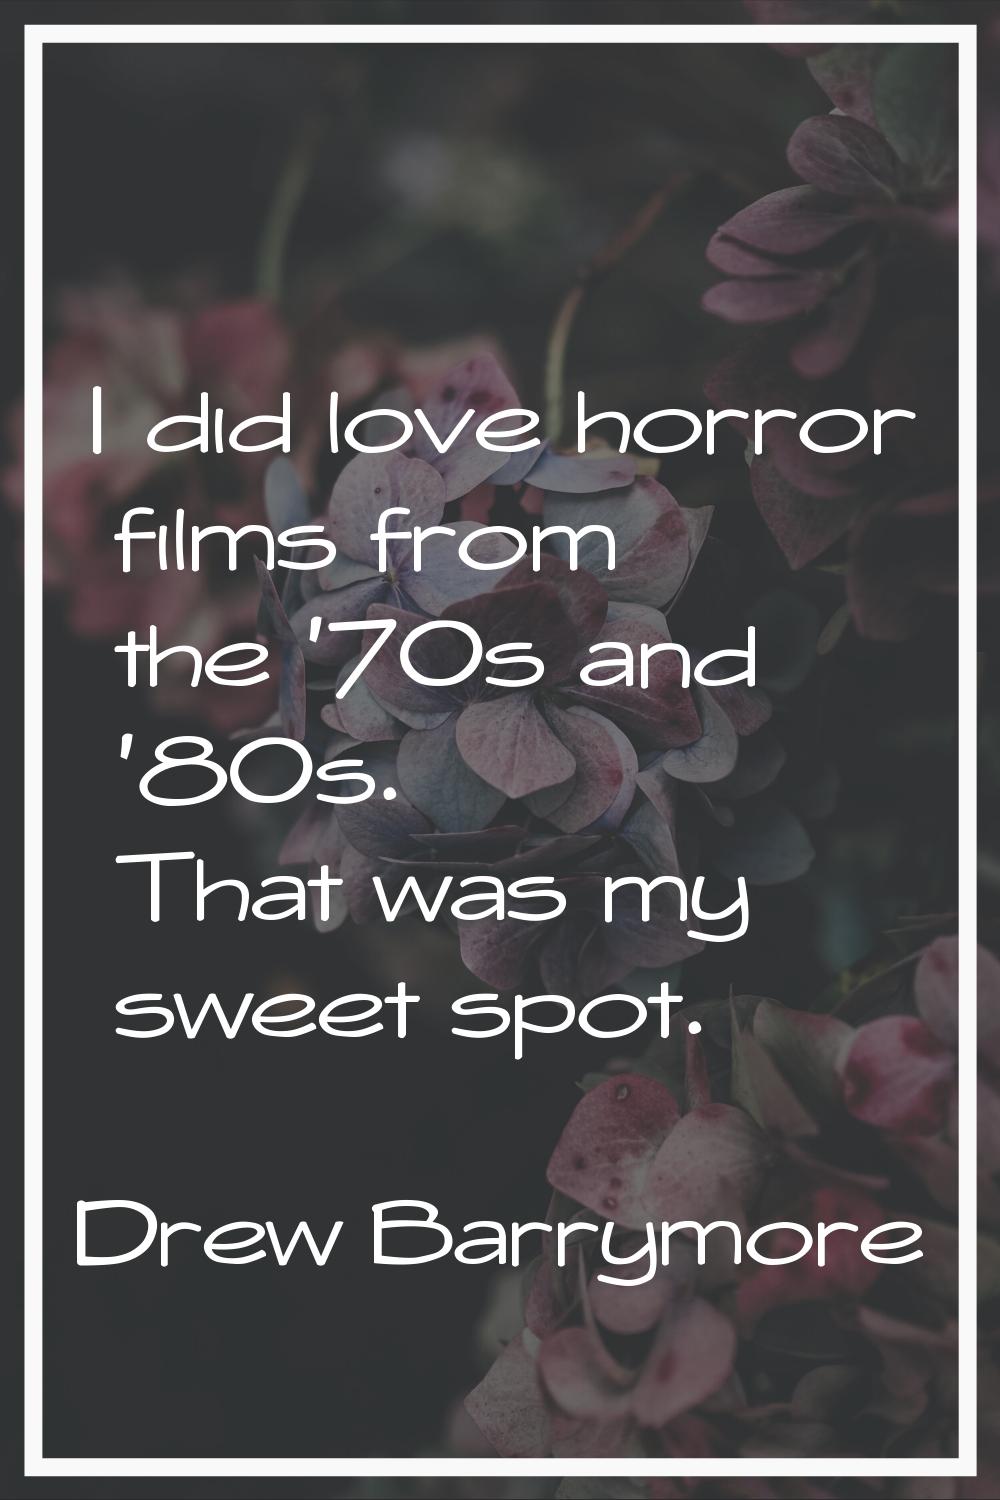 I did love horror films from the '70s and '80s. That was my sweet spot.